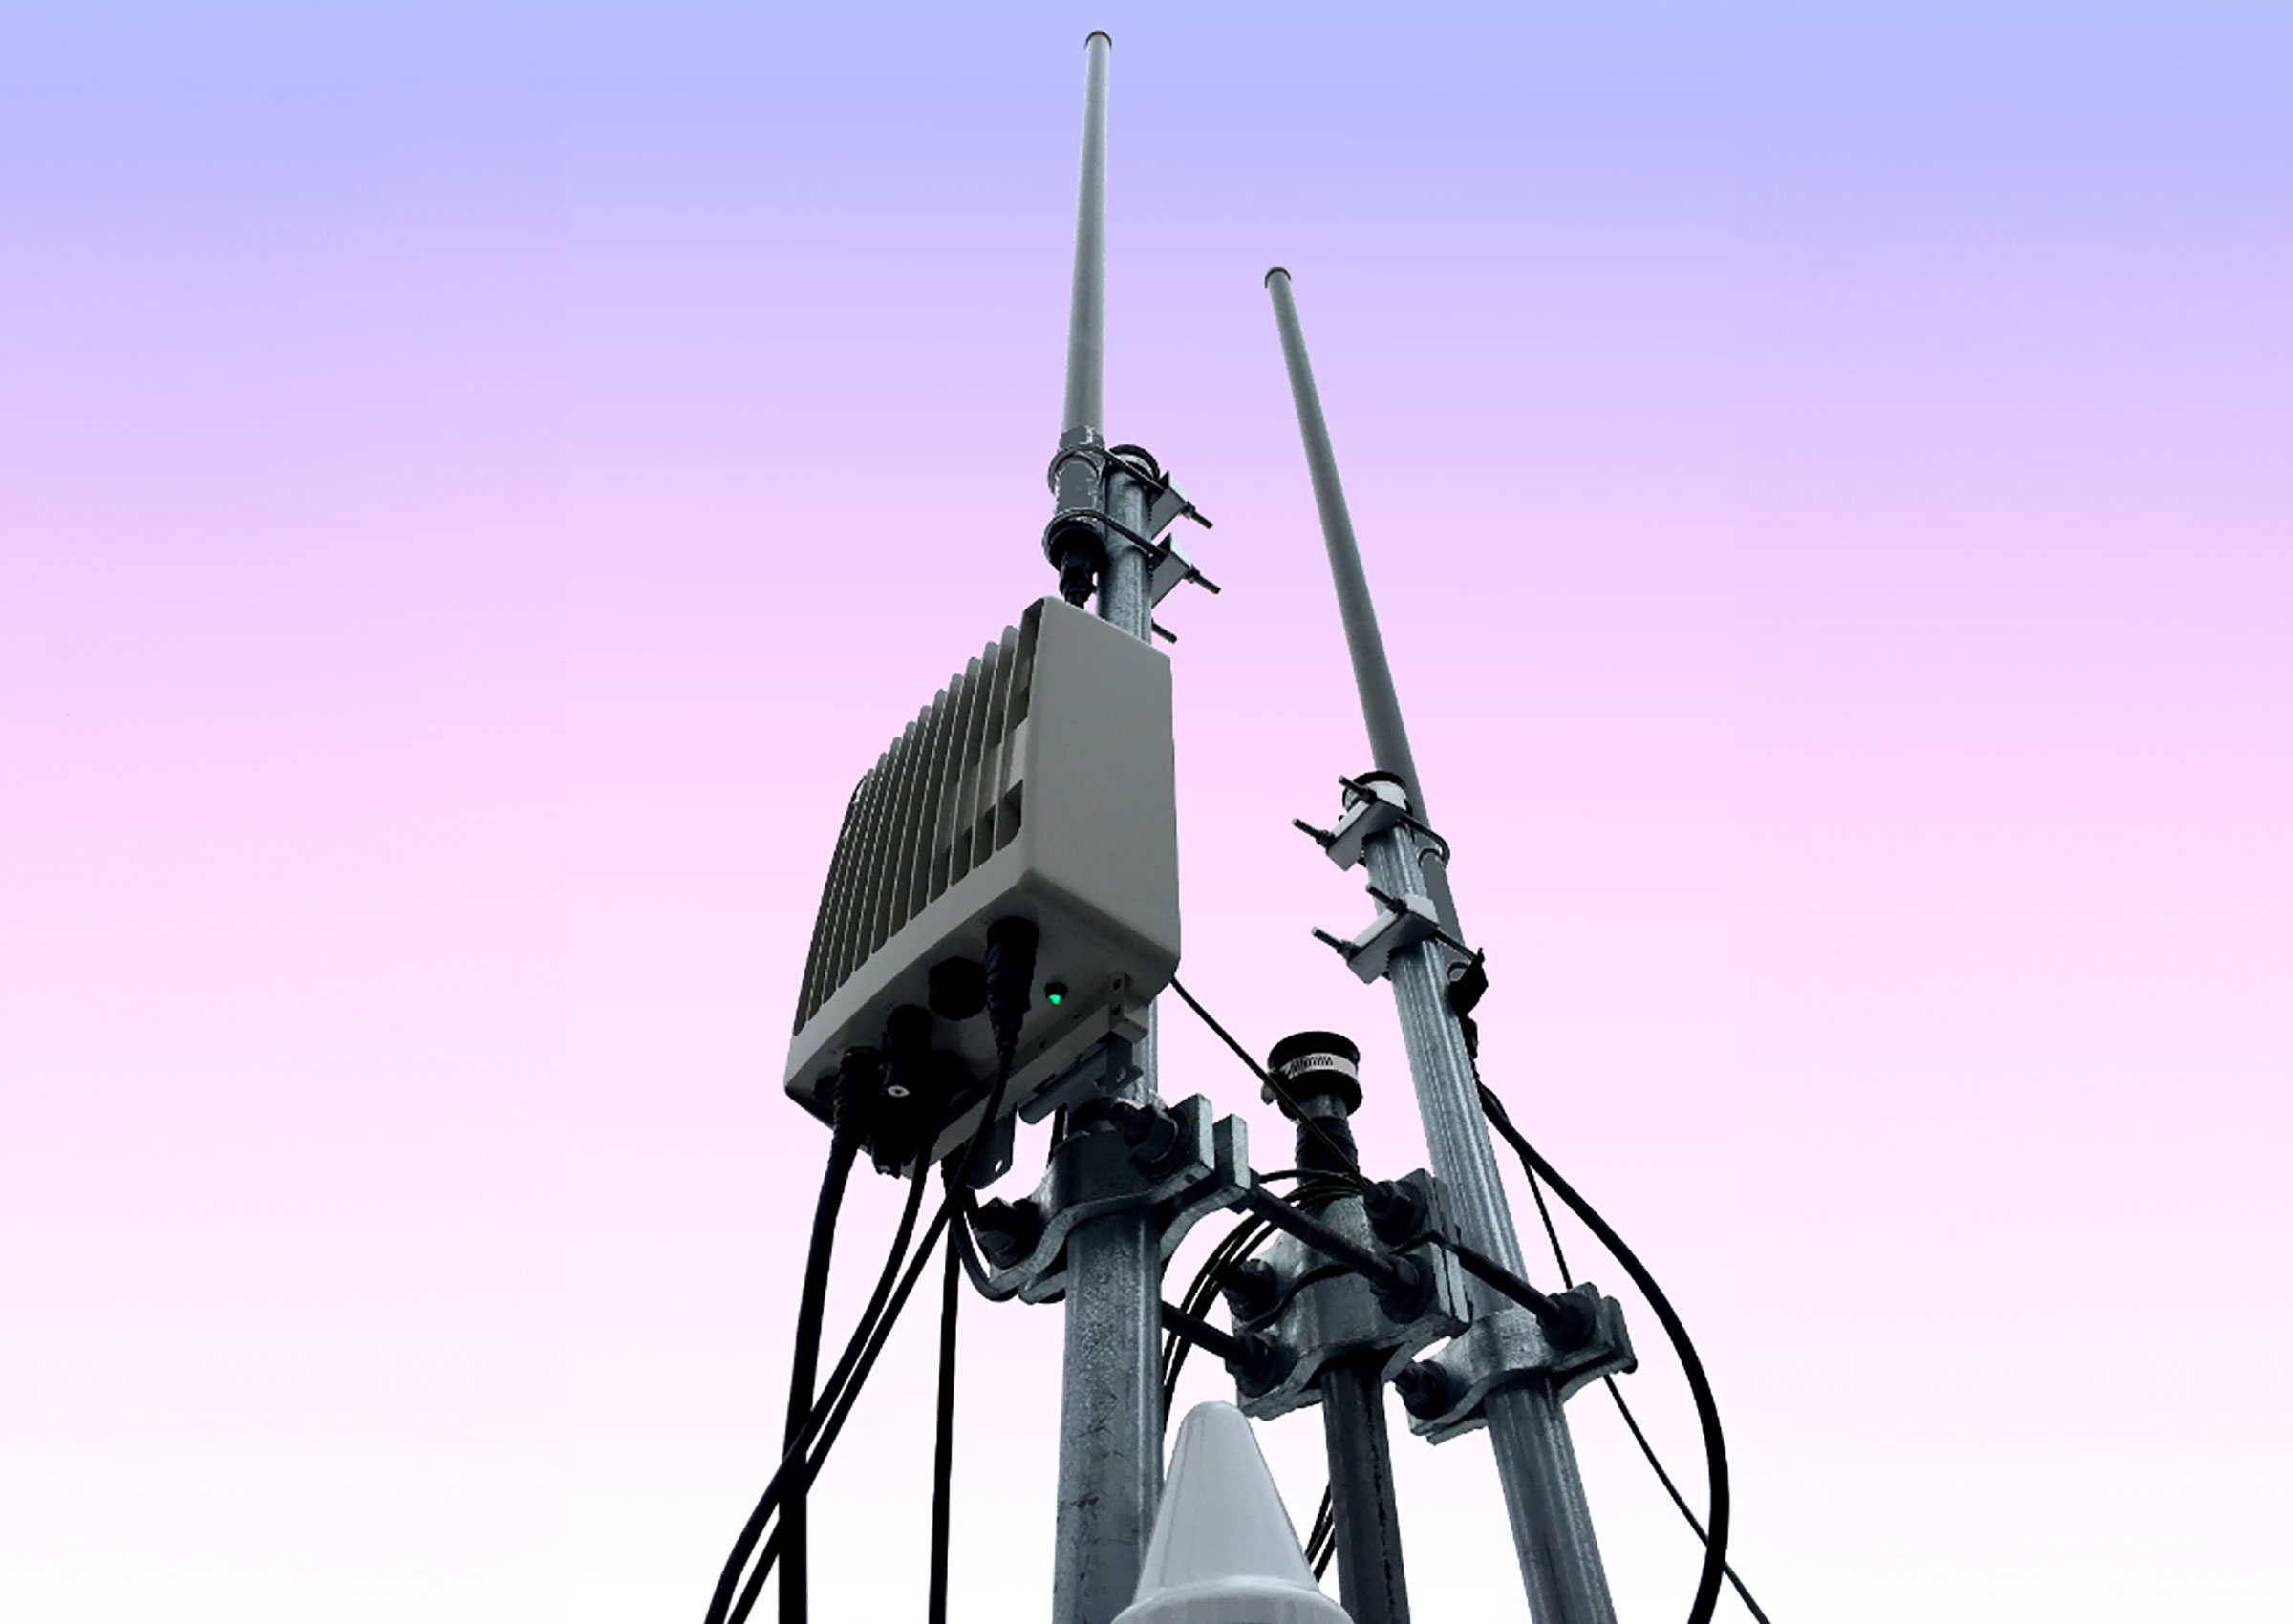 Why Your Outdoor Radio’s Antenna Placement Matters